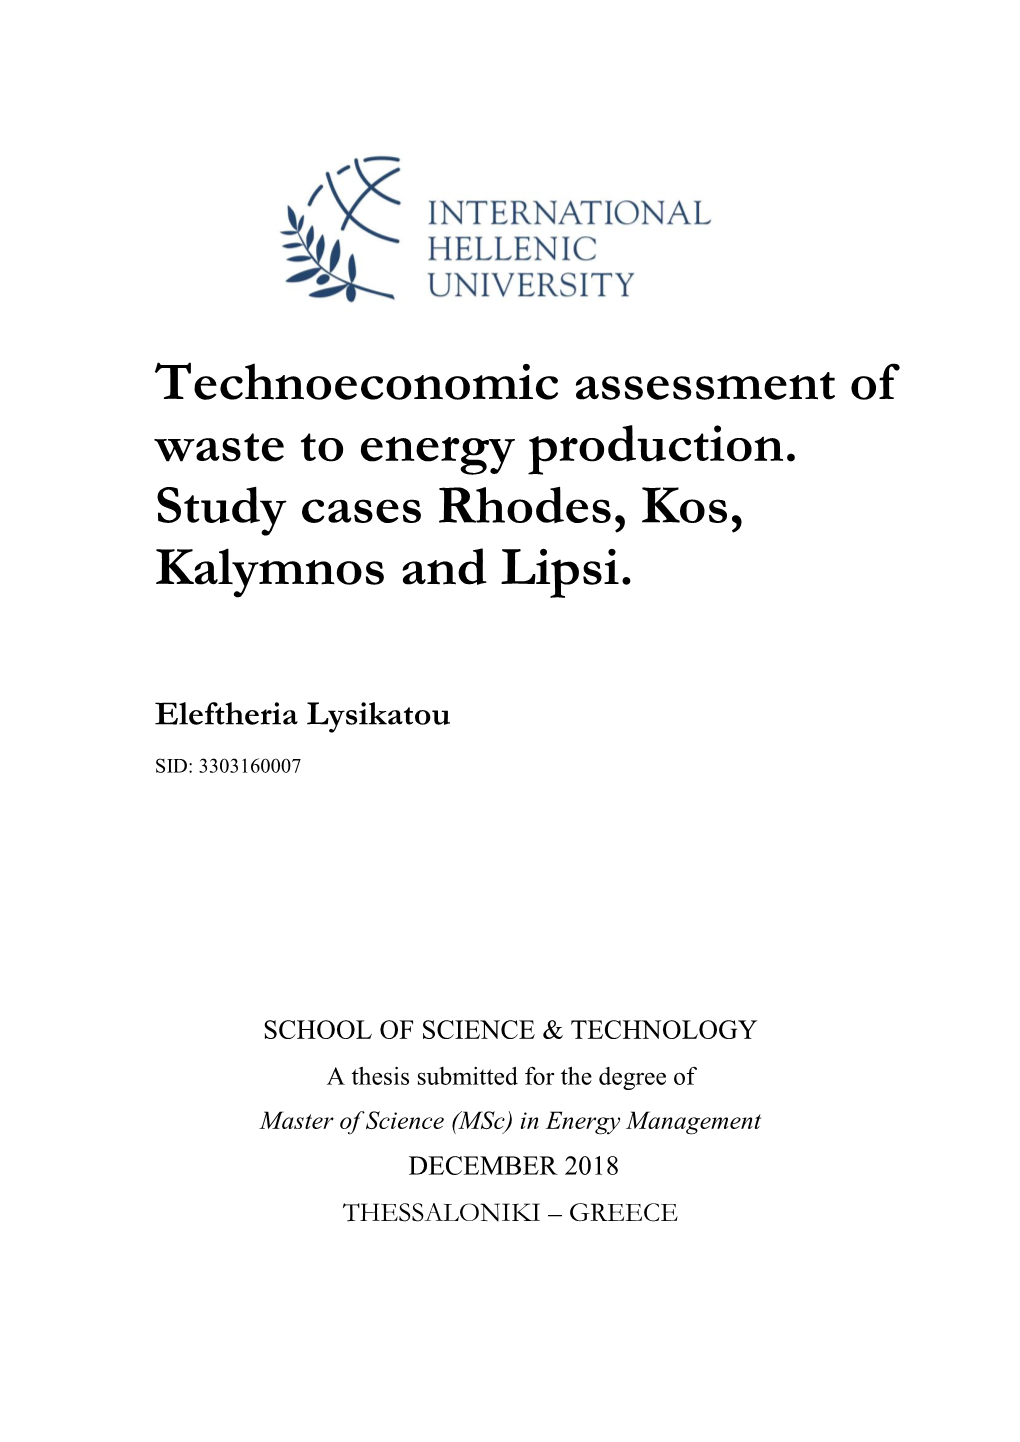 Technoeconomic Assessment of Waste to Energy Production. Study Cases Rhodes, Kos, Kalymnos and Lipsi